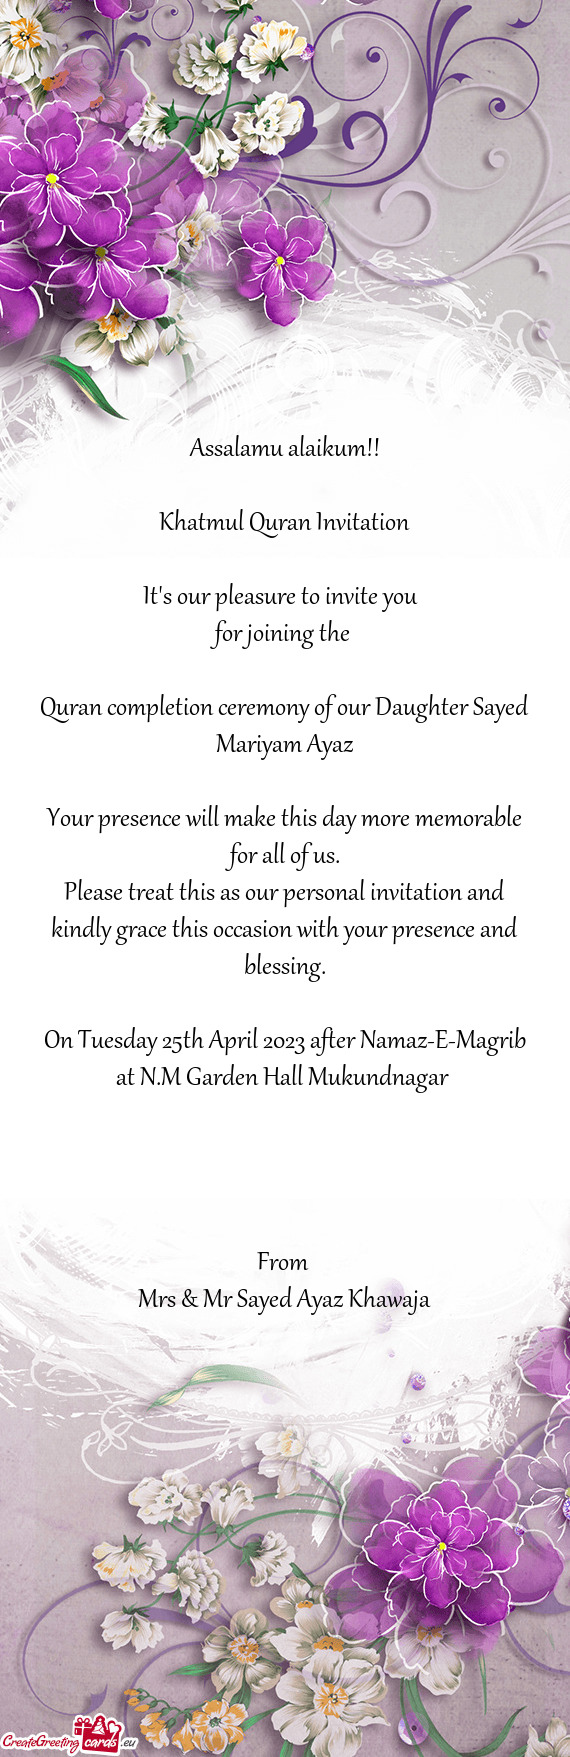 Quran completion ceremony of our Daughter Sayed Mariyam Ayaz